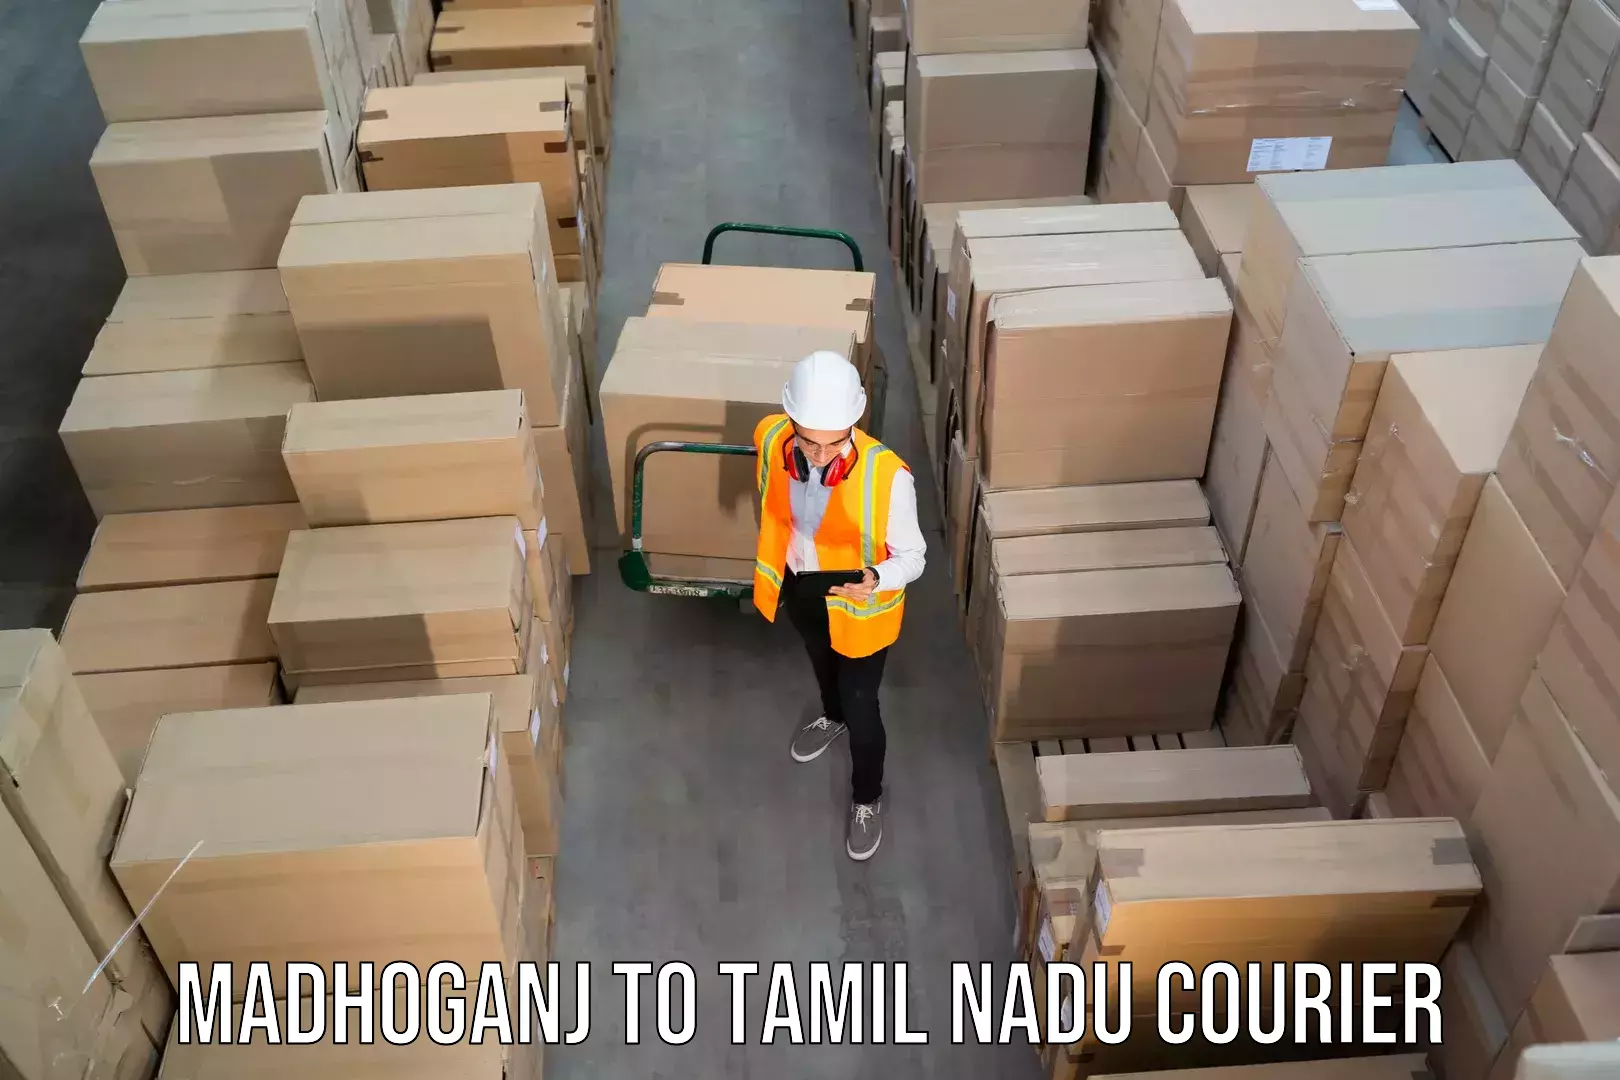 Reliable shipping partners Madhoganj to Mettur